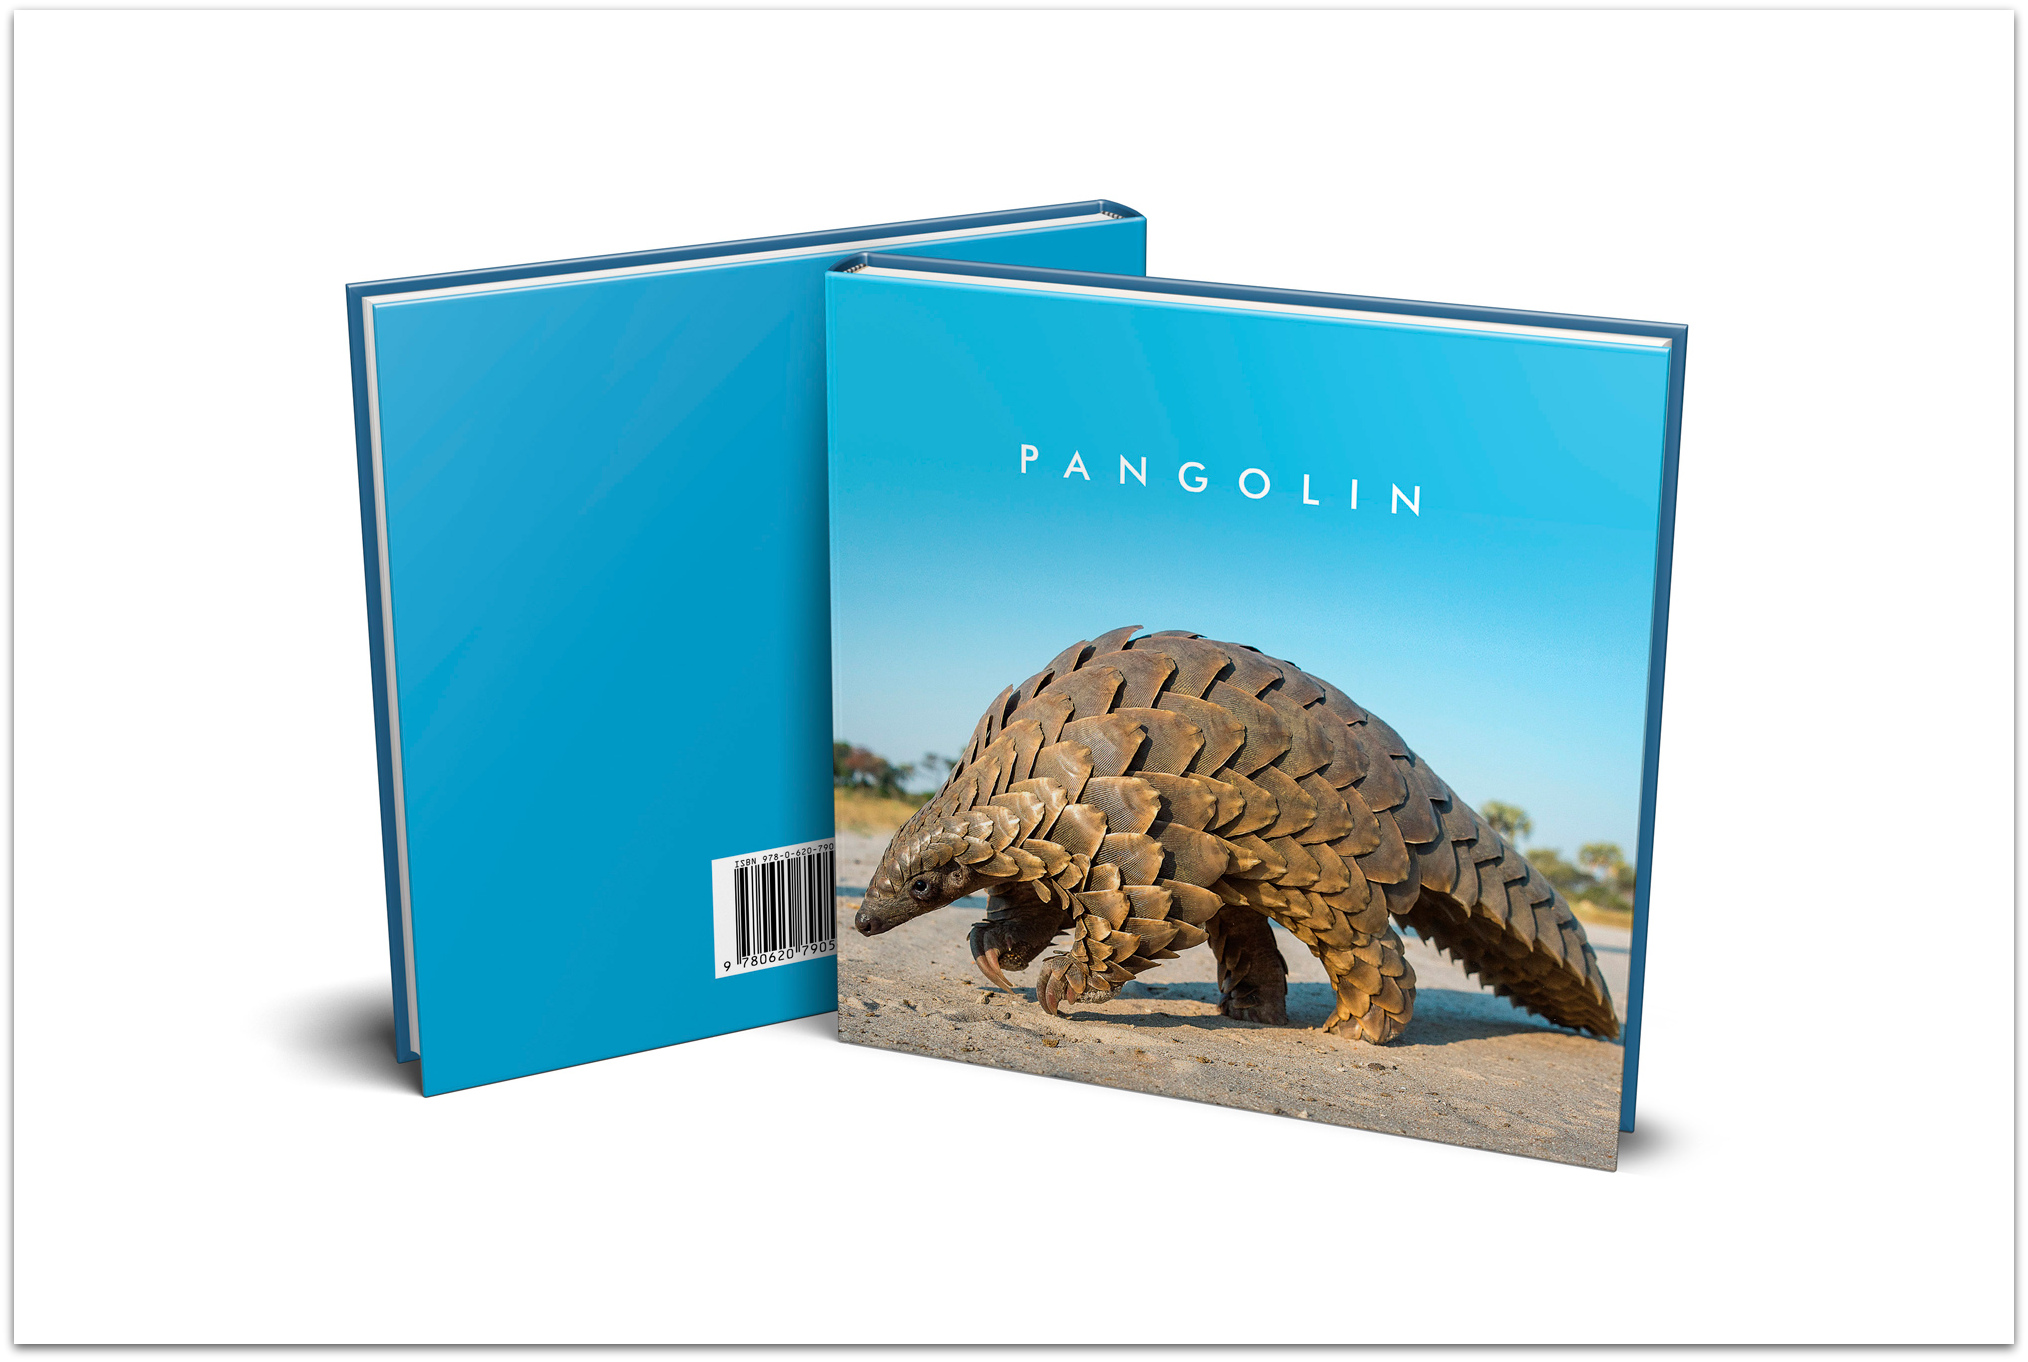 Pangolin by Laura Bryant